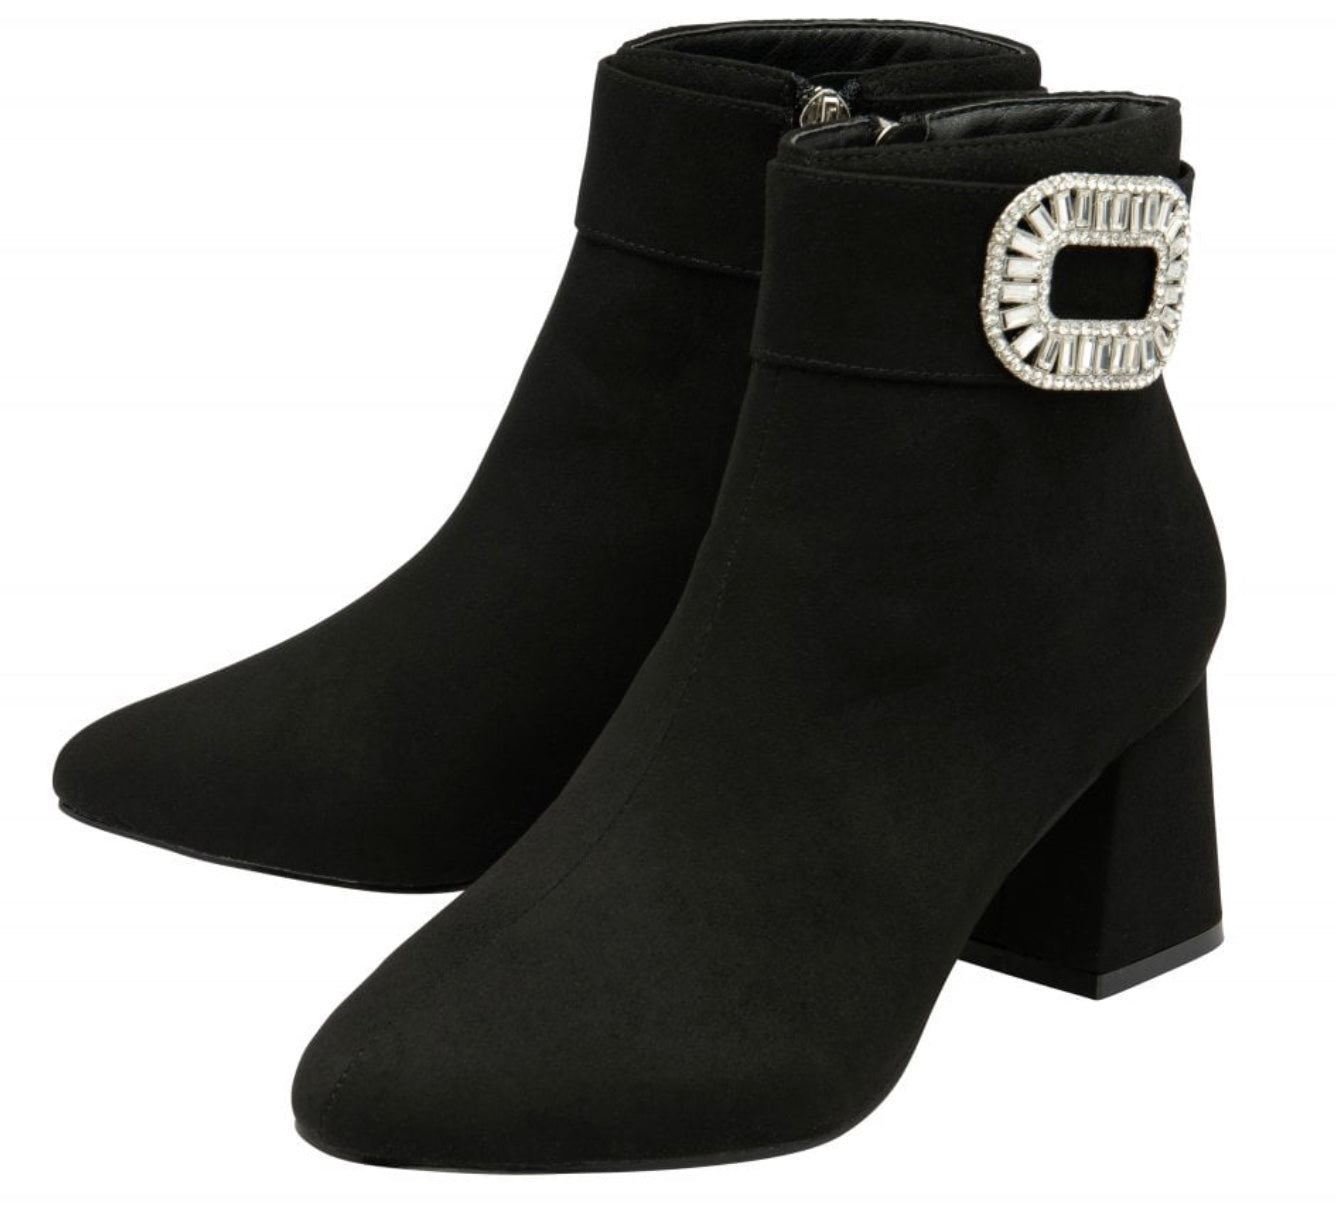 Lotus Duffie ankle Black boot